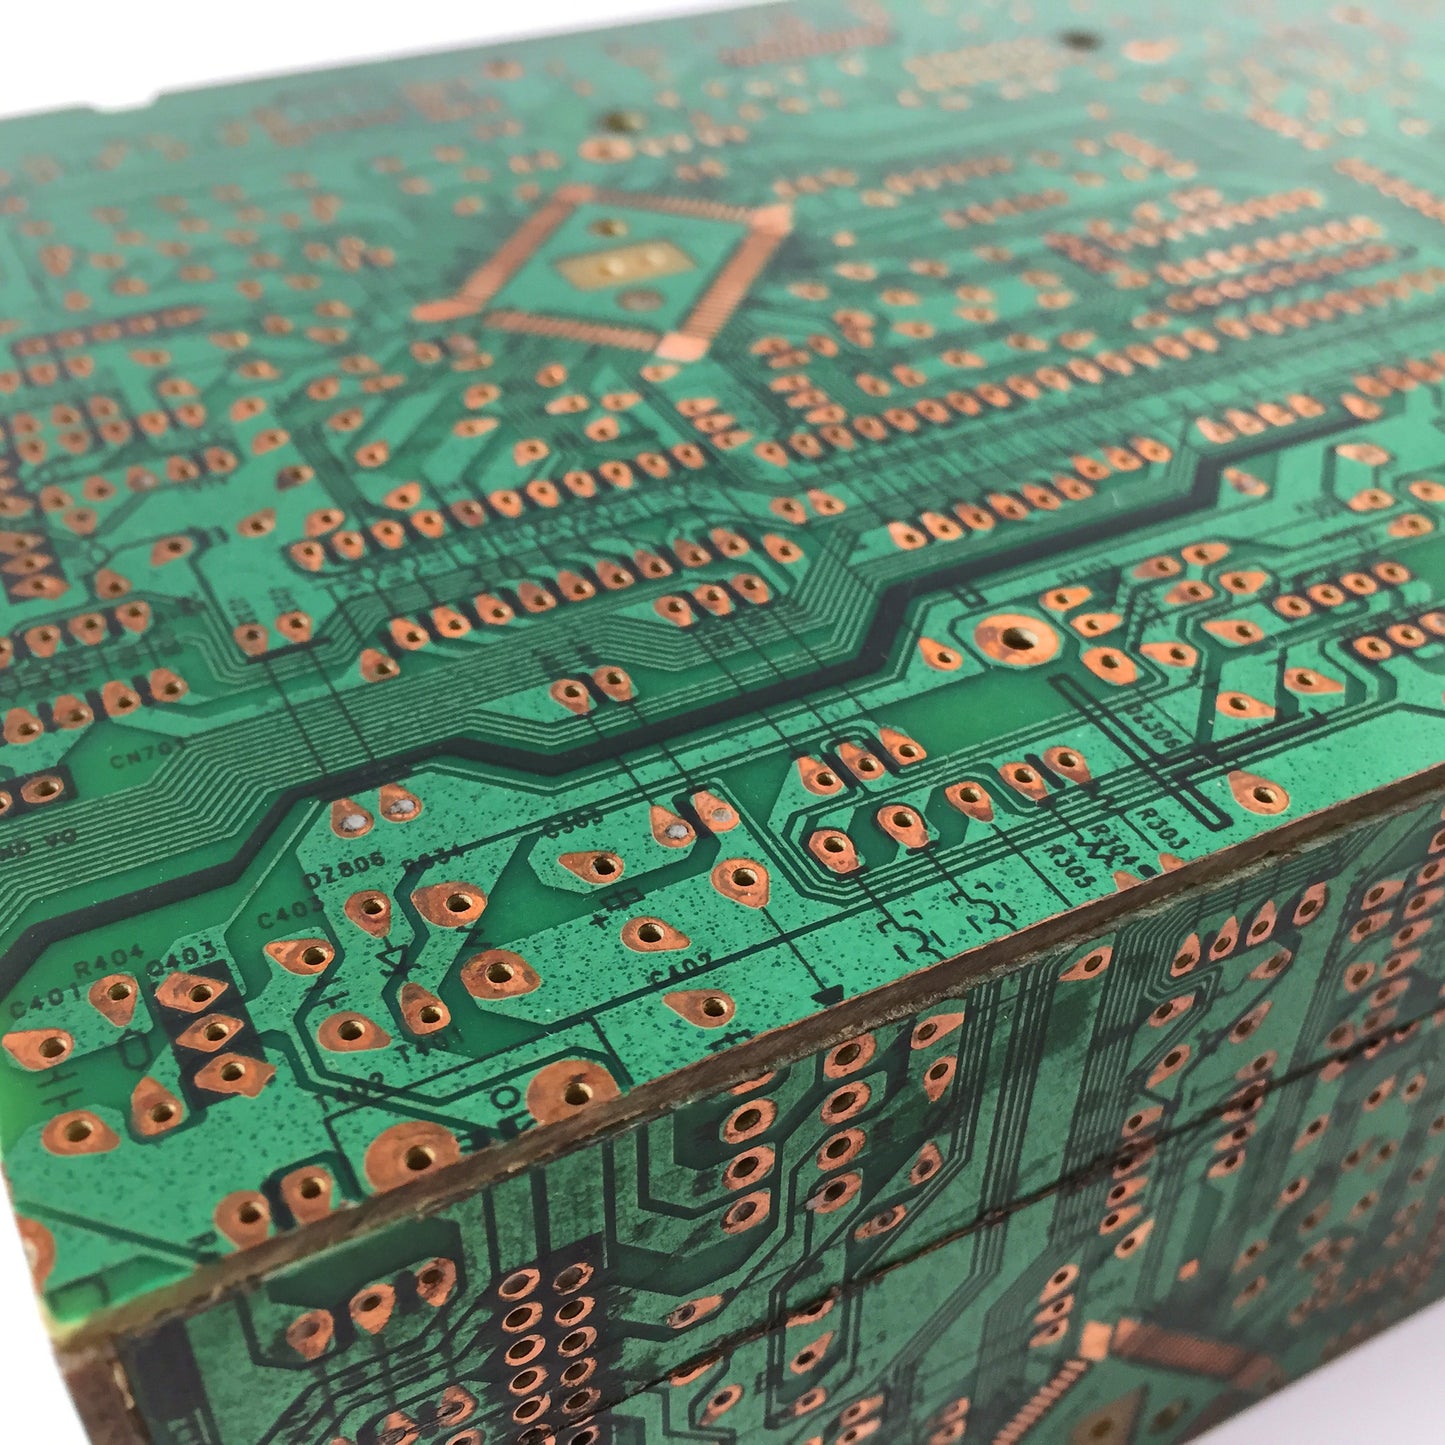 Techno Box handcrafted from MDF wood and recycled motherboard